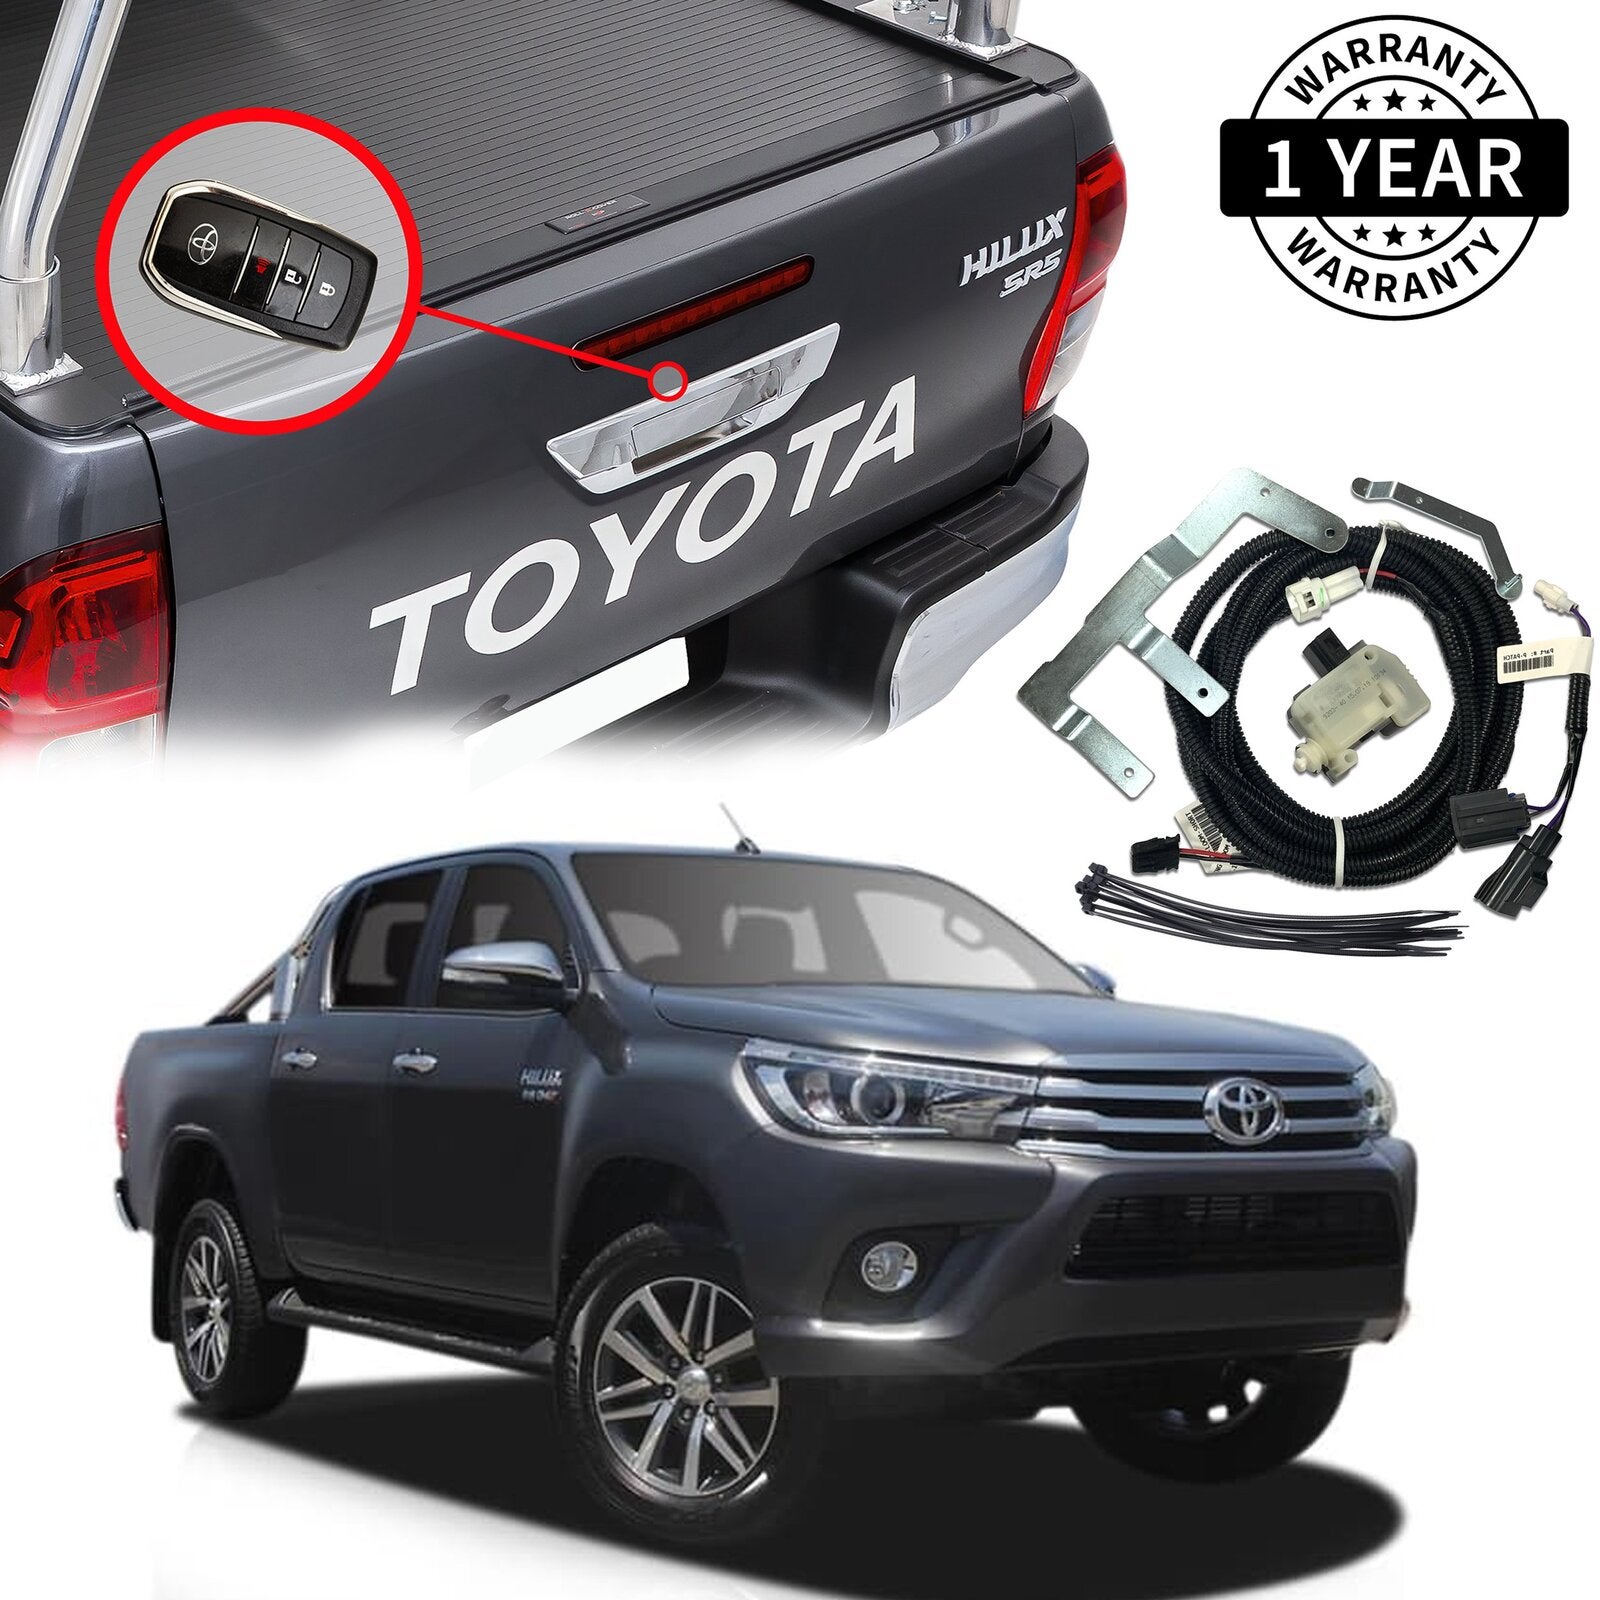 Grunt 4x4 Tailgate Central Locking Kit for Toyota Hilux 2015-2018 w/out barrel l